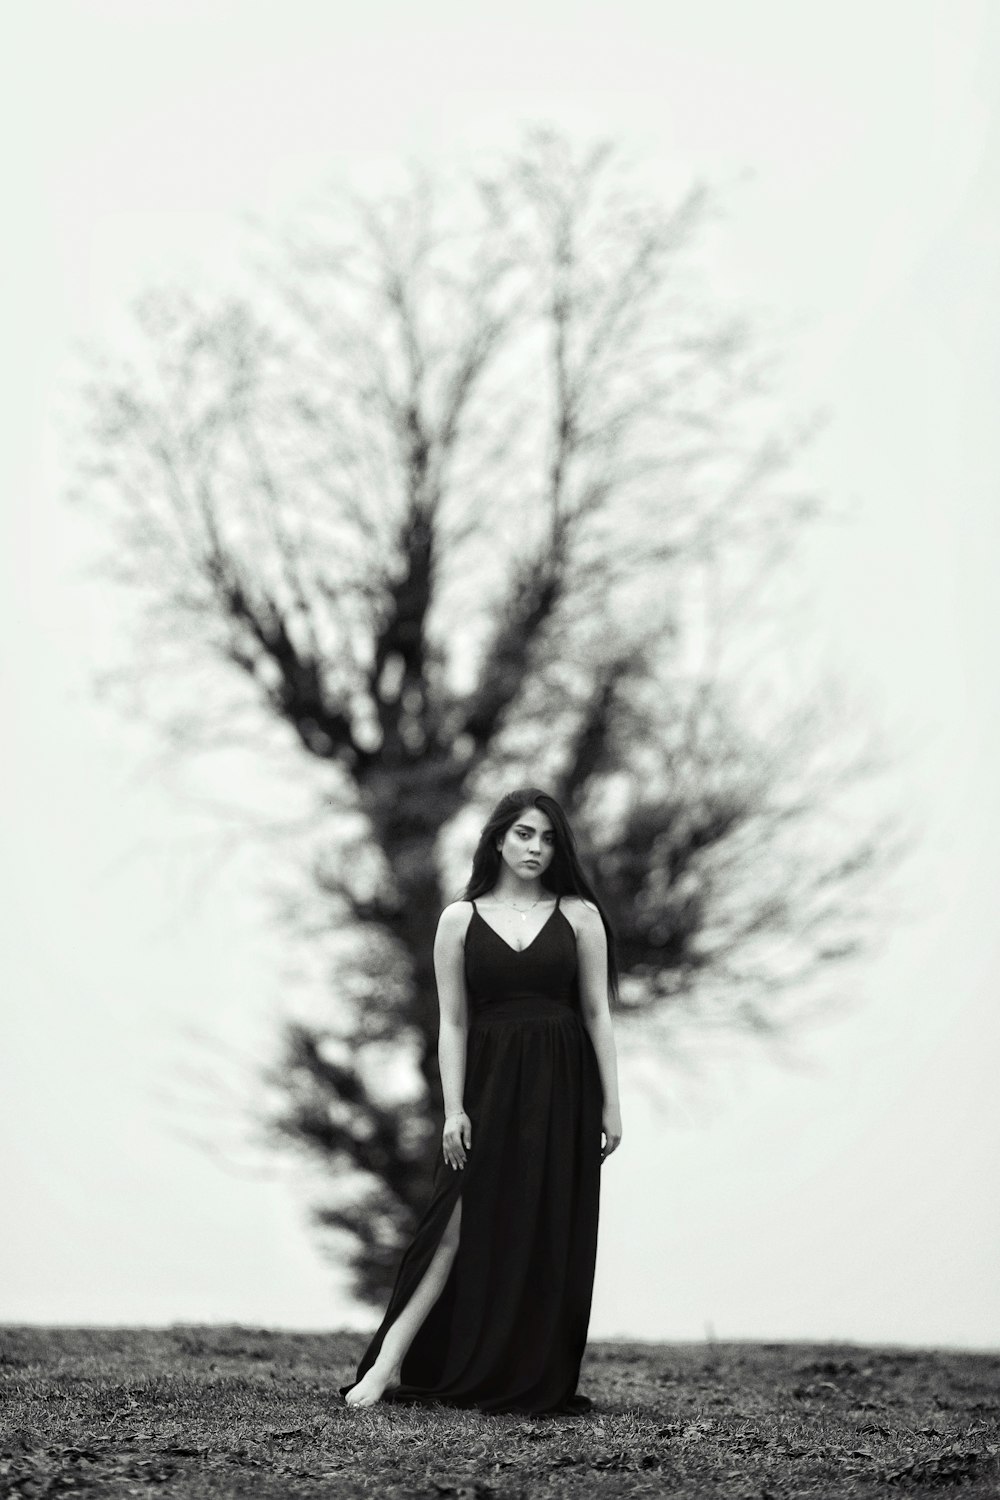 a woman in a long black dress standing in front of a tree